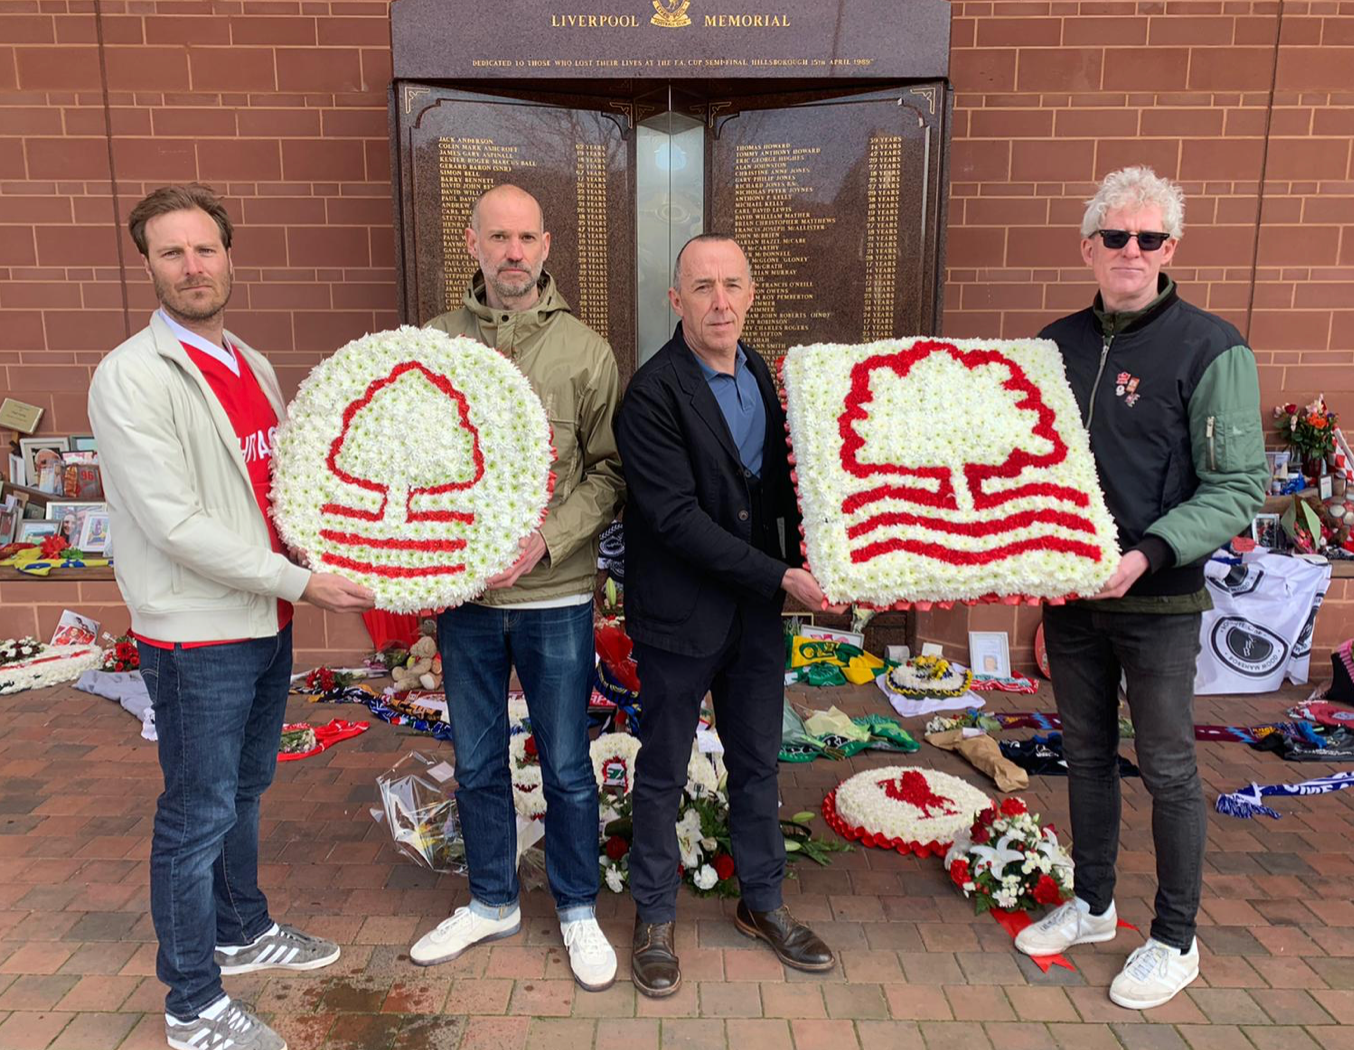 Members of the NFFC Supporters’ Trust share their support at the Hillsborough memorial